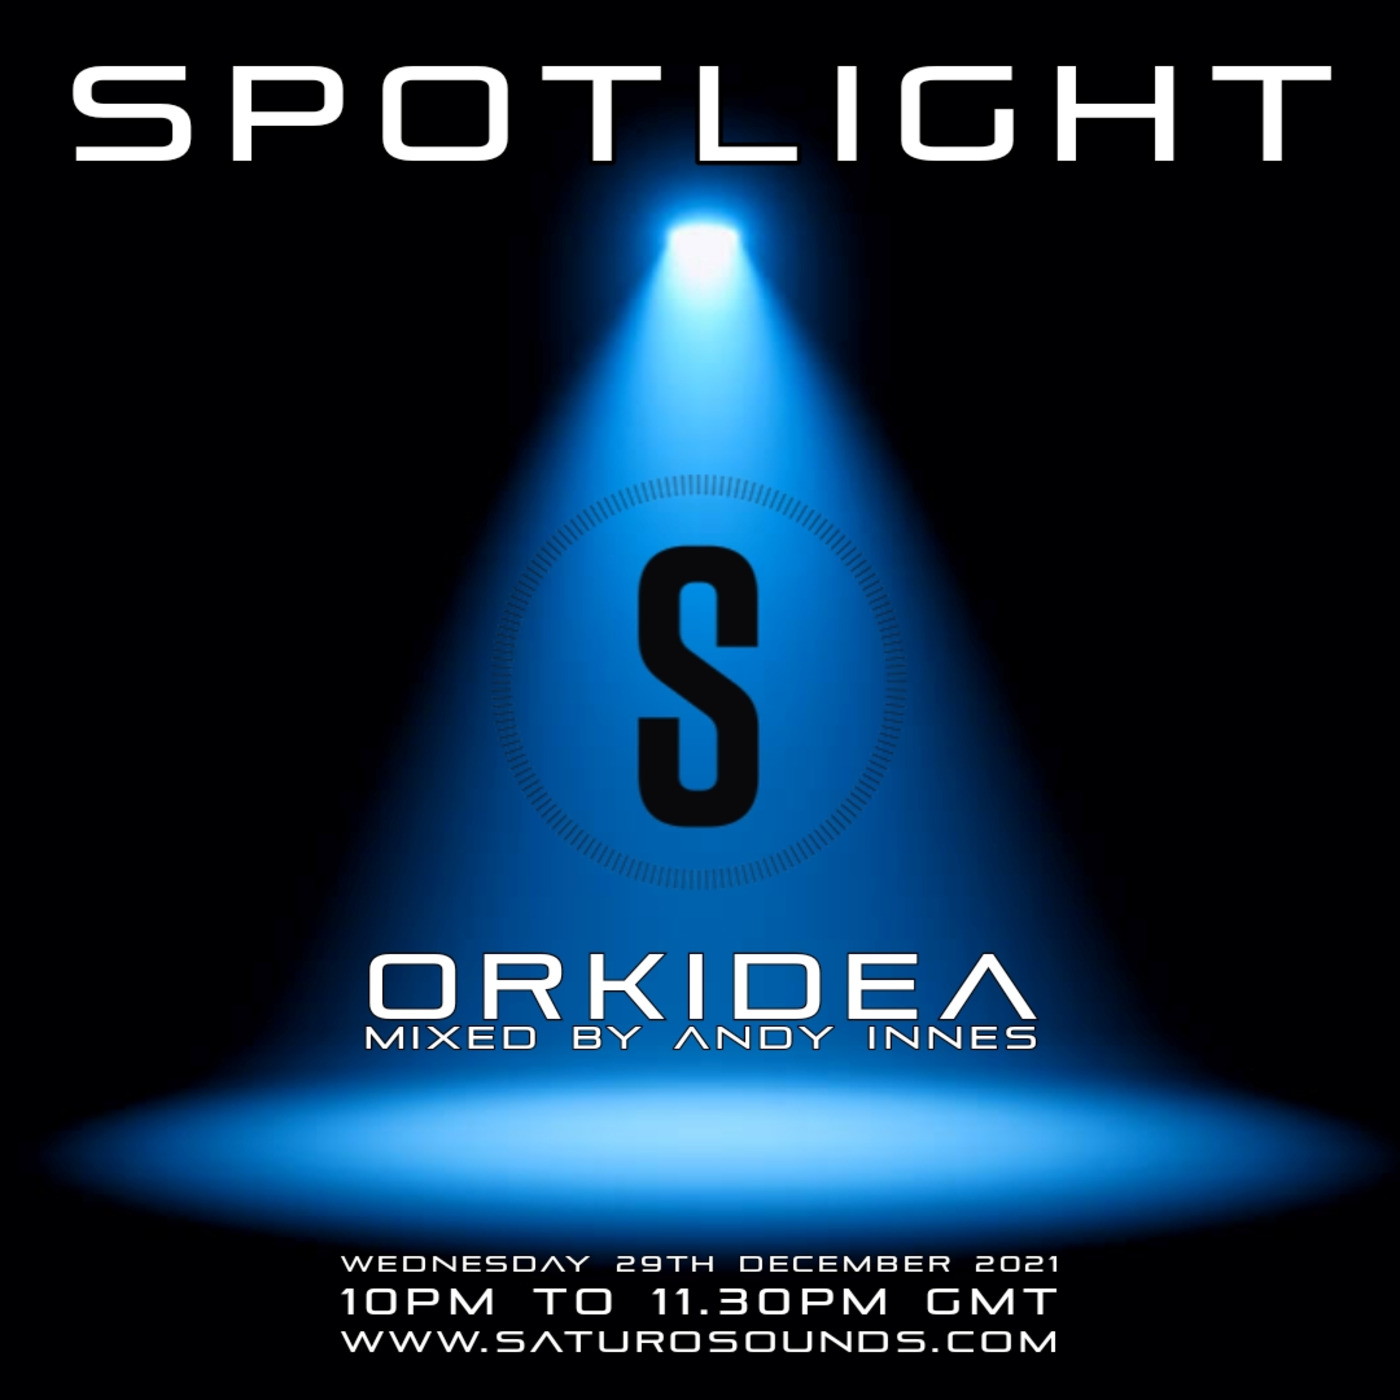 Spotlight on Orkidea mixed by Andy Innes, Saturo Sounds, 29th December 2021